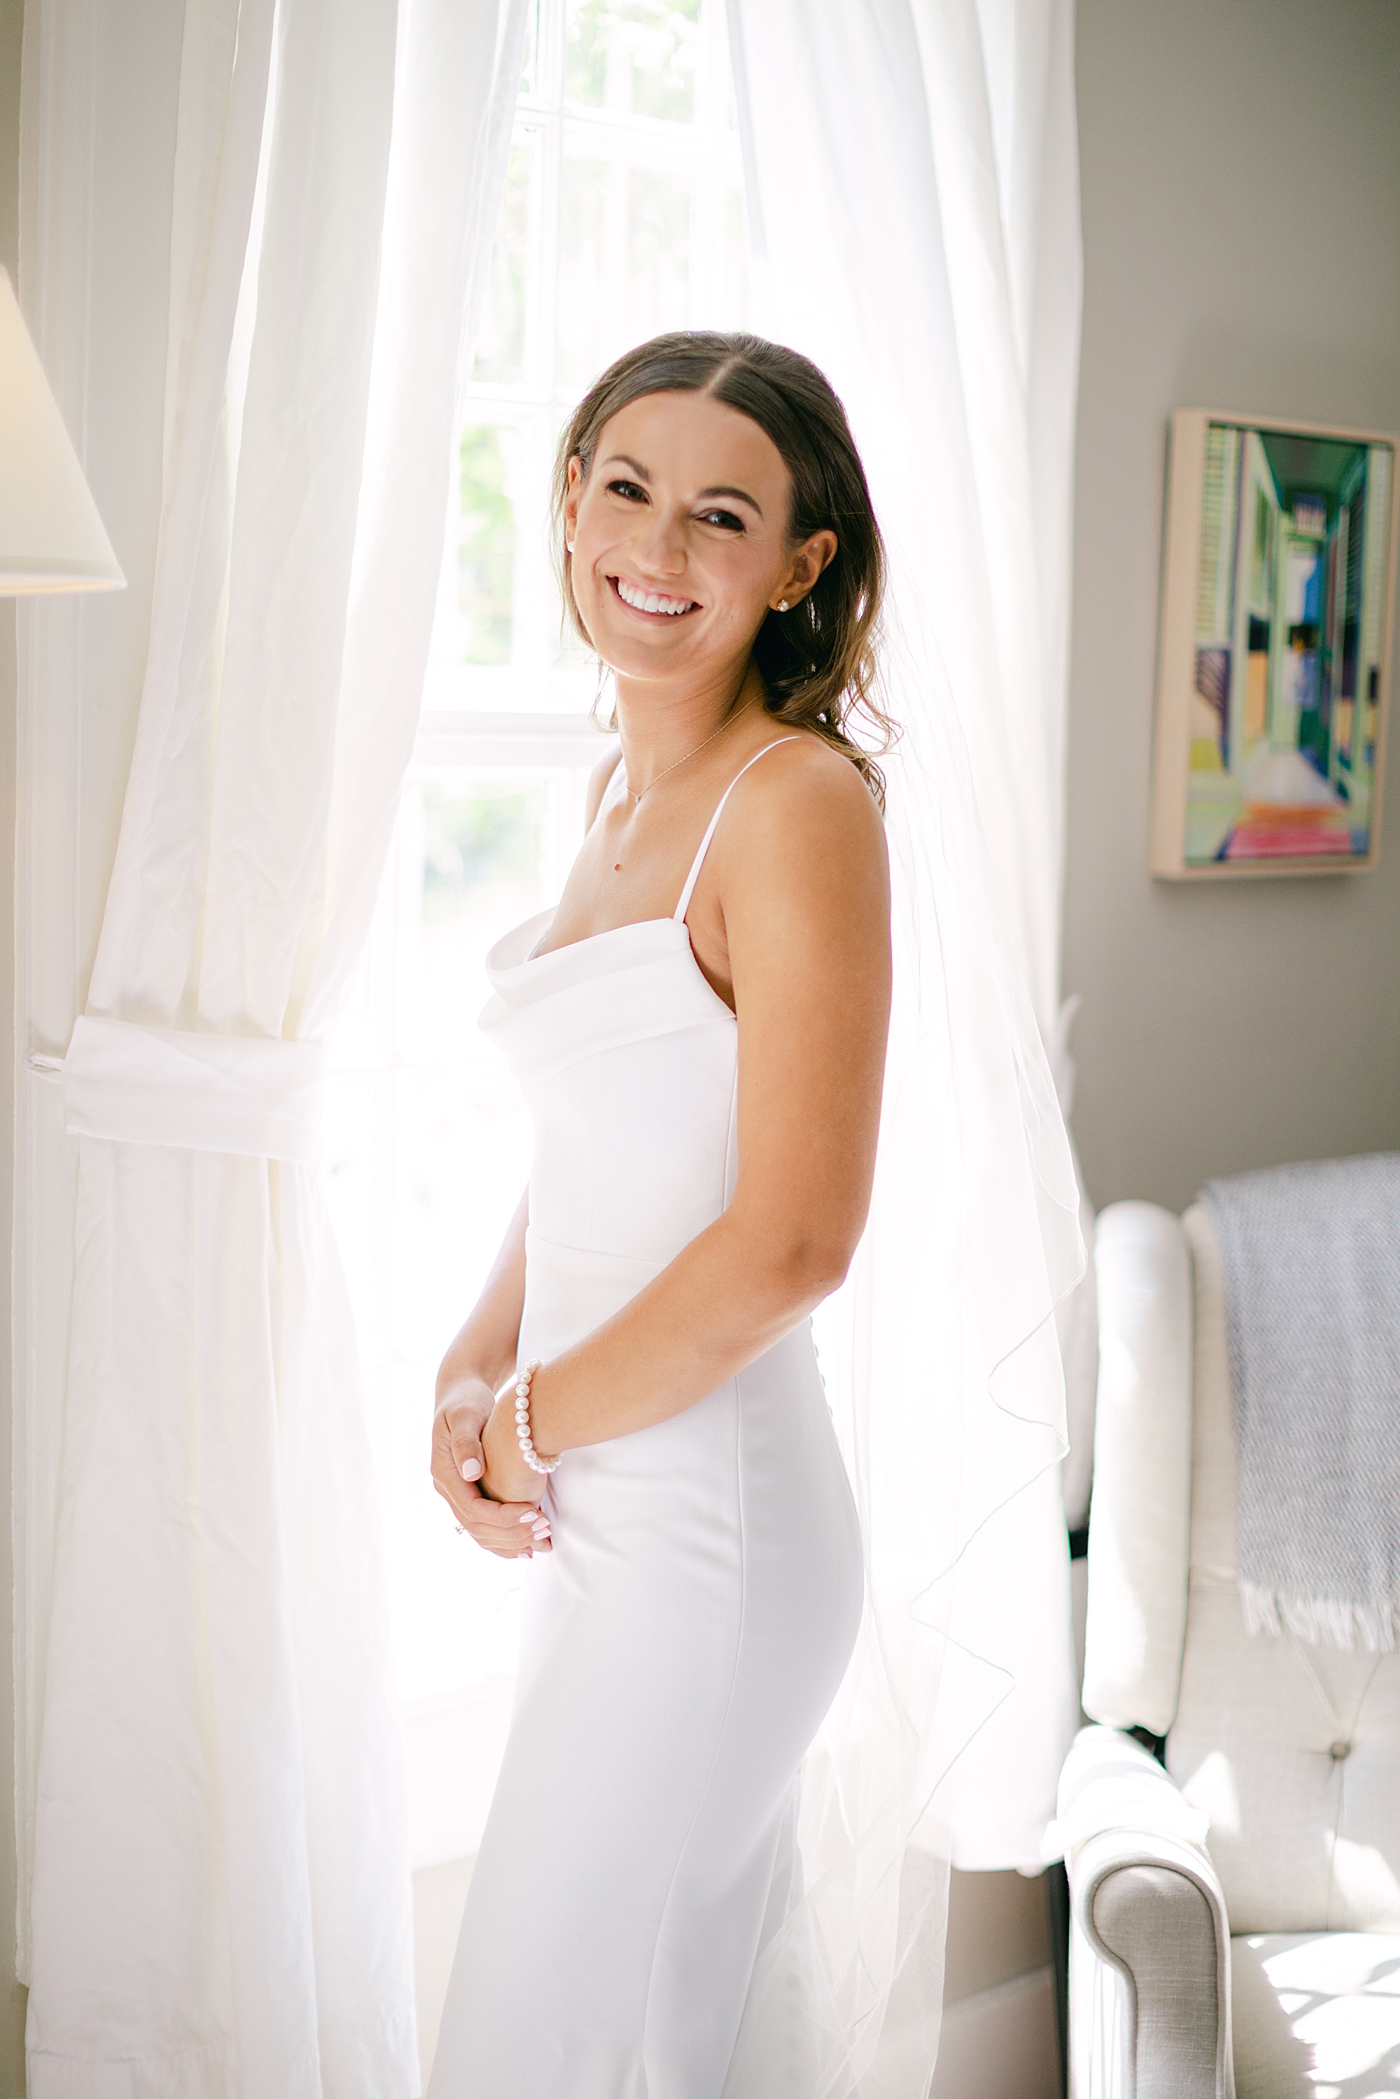 Bride smiling near a window | Image by Hudson Valley Wedding Photographer Hope Helmuth